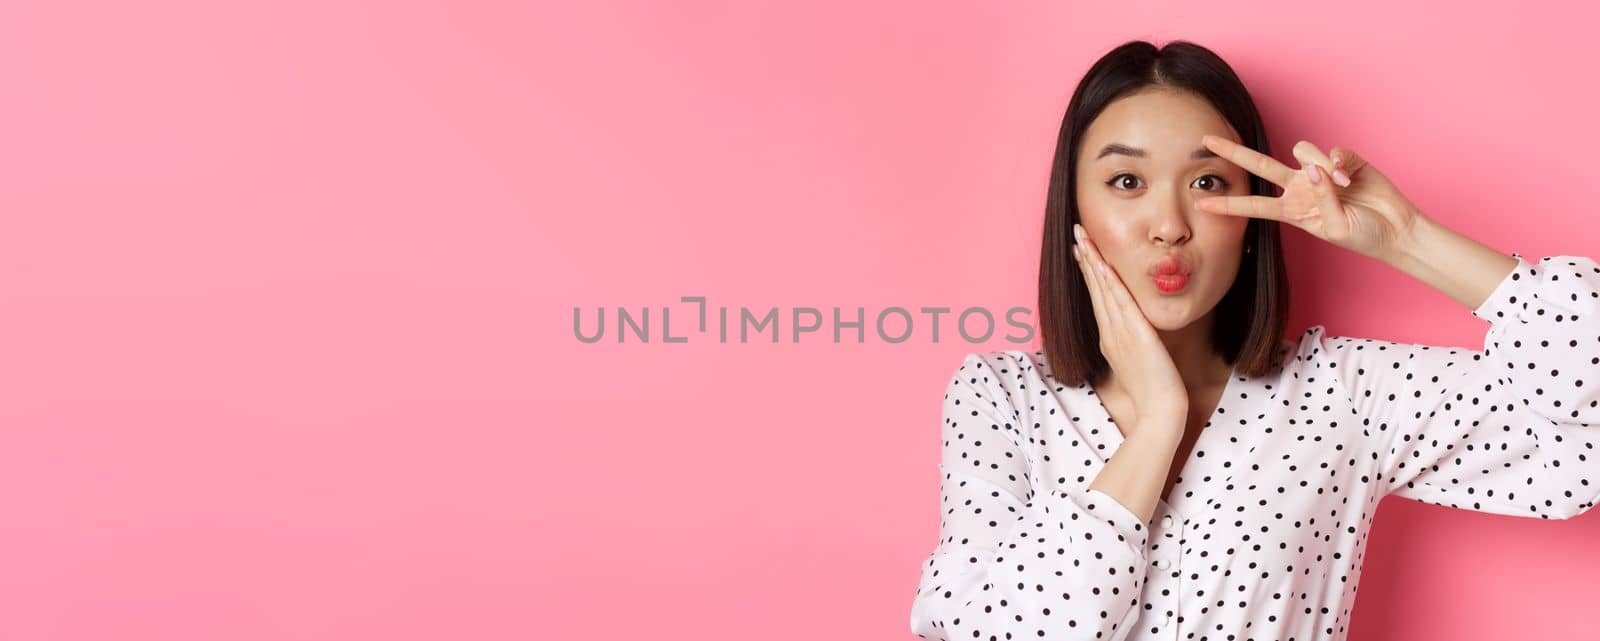 Beauty and lifestyle concept. Close-up of pretty asian woman showing peace sign and touching cheek, smiling happy at camera, standing over pink background.